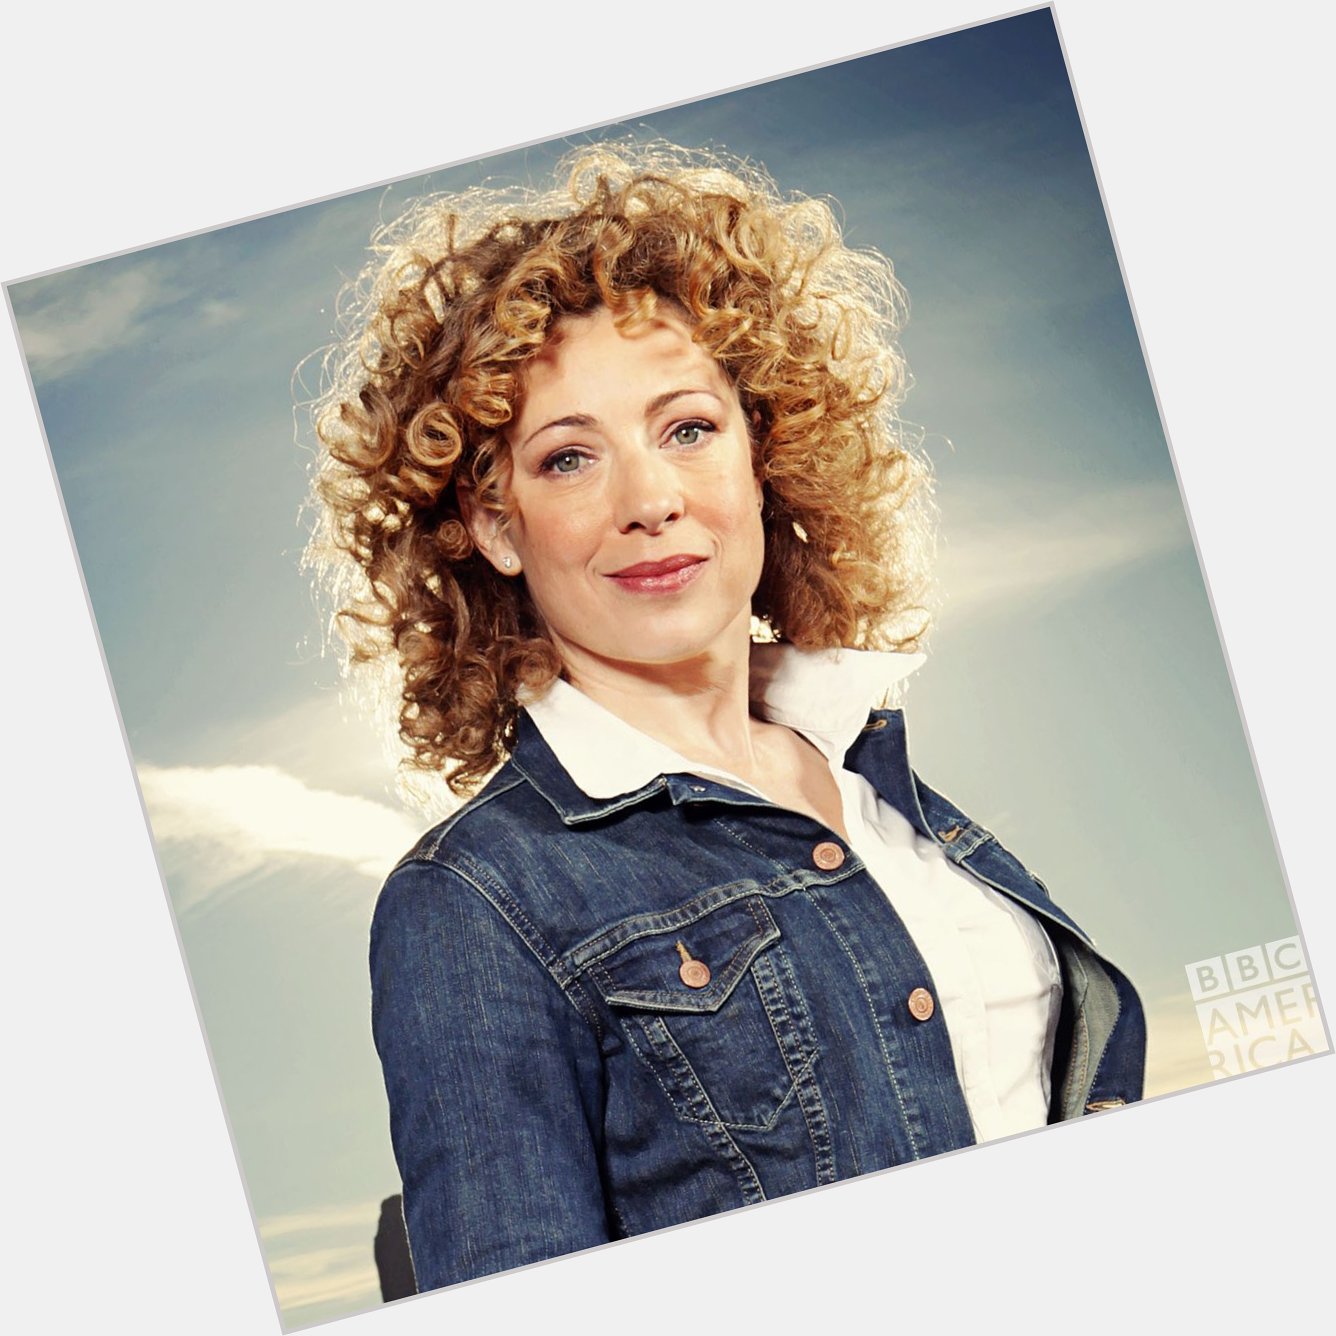 Happy birthday to our favorite archaeologist turned professor, Alex Kingston!  